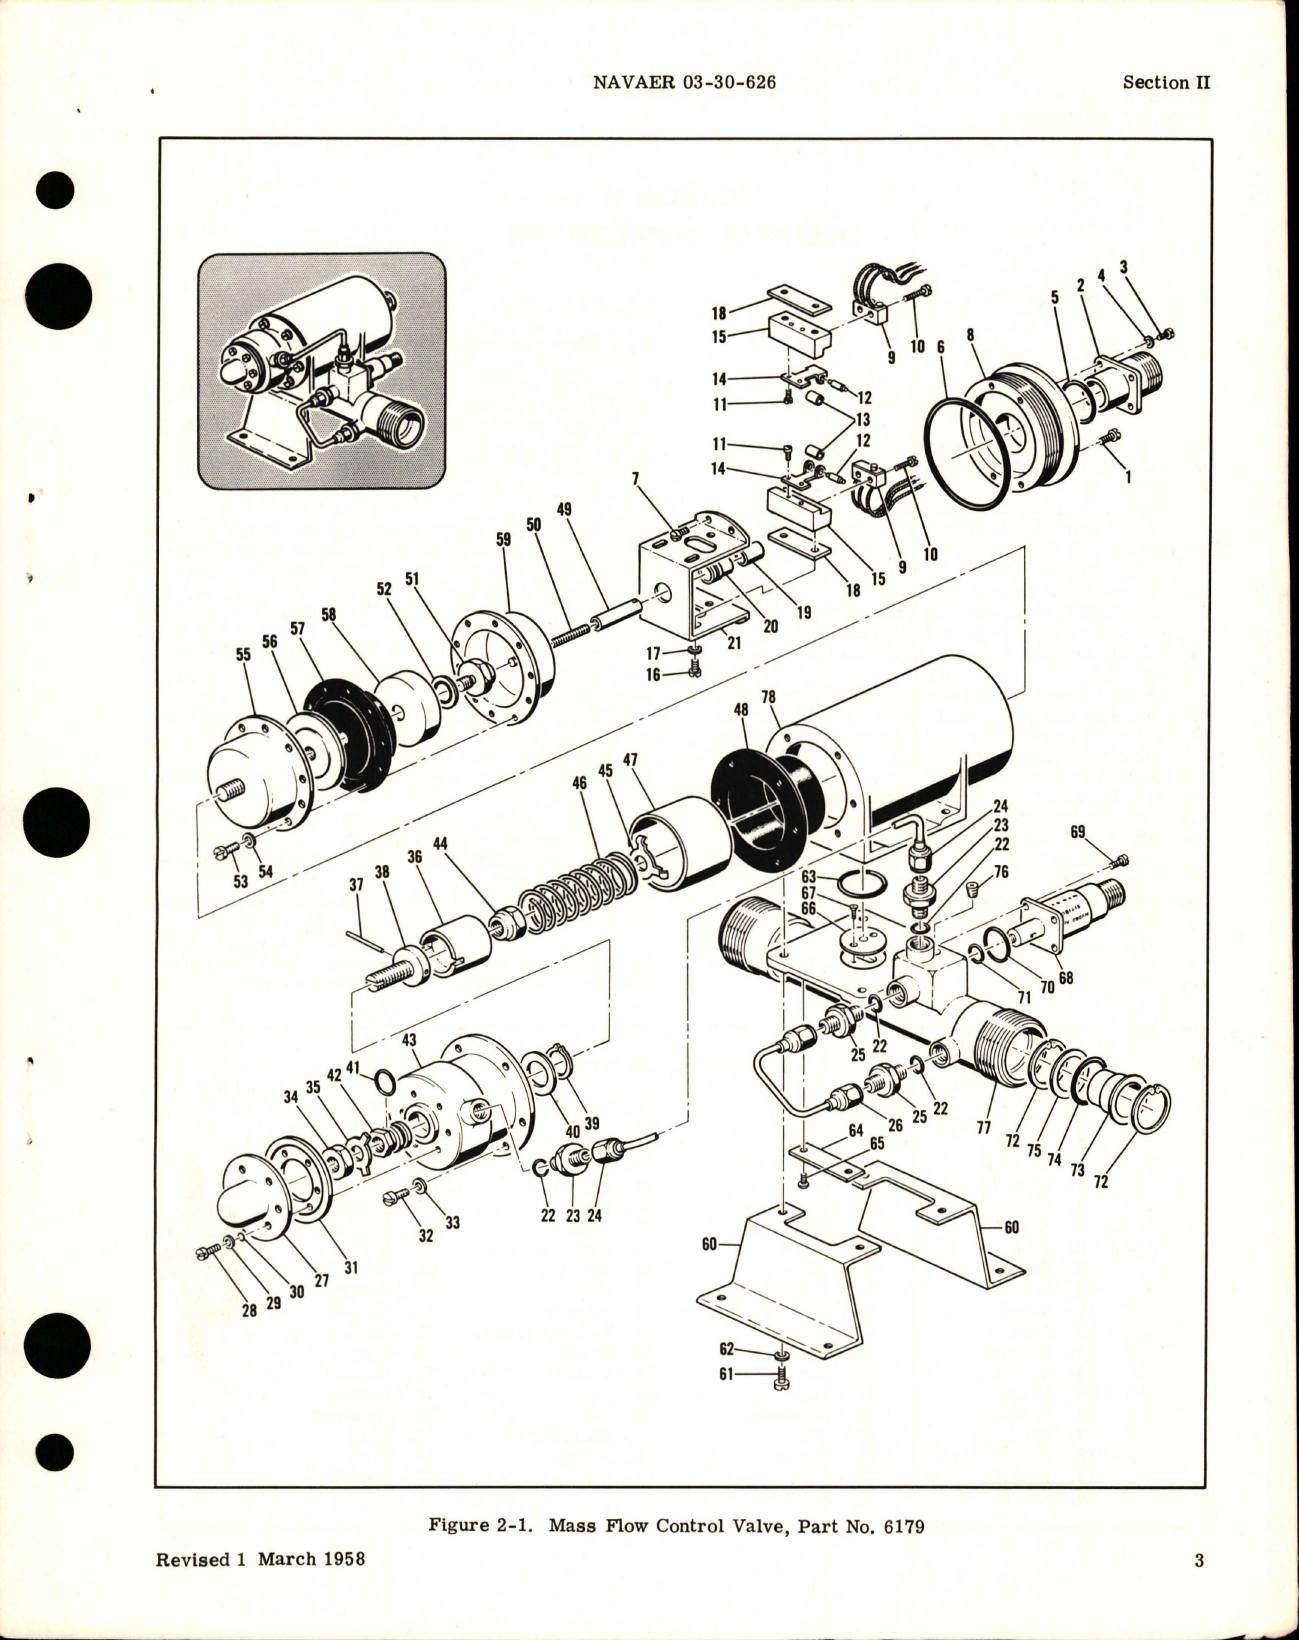 Sample page 5 from AirCorps Library document: Overhaul Instructions for Mass Flow Control Valve - Parts 6179 and 6179A